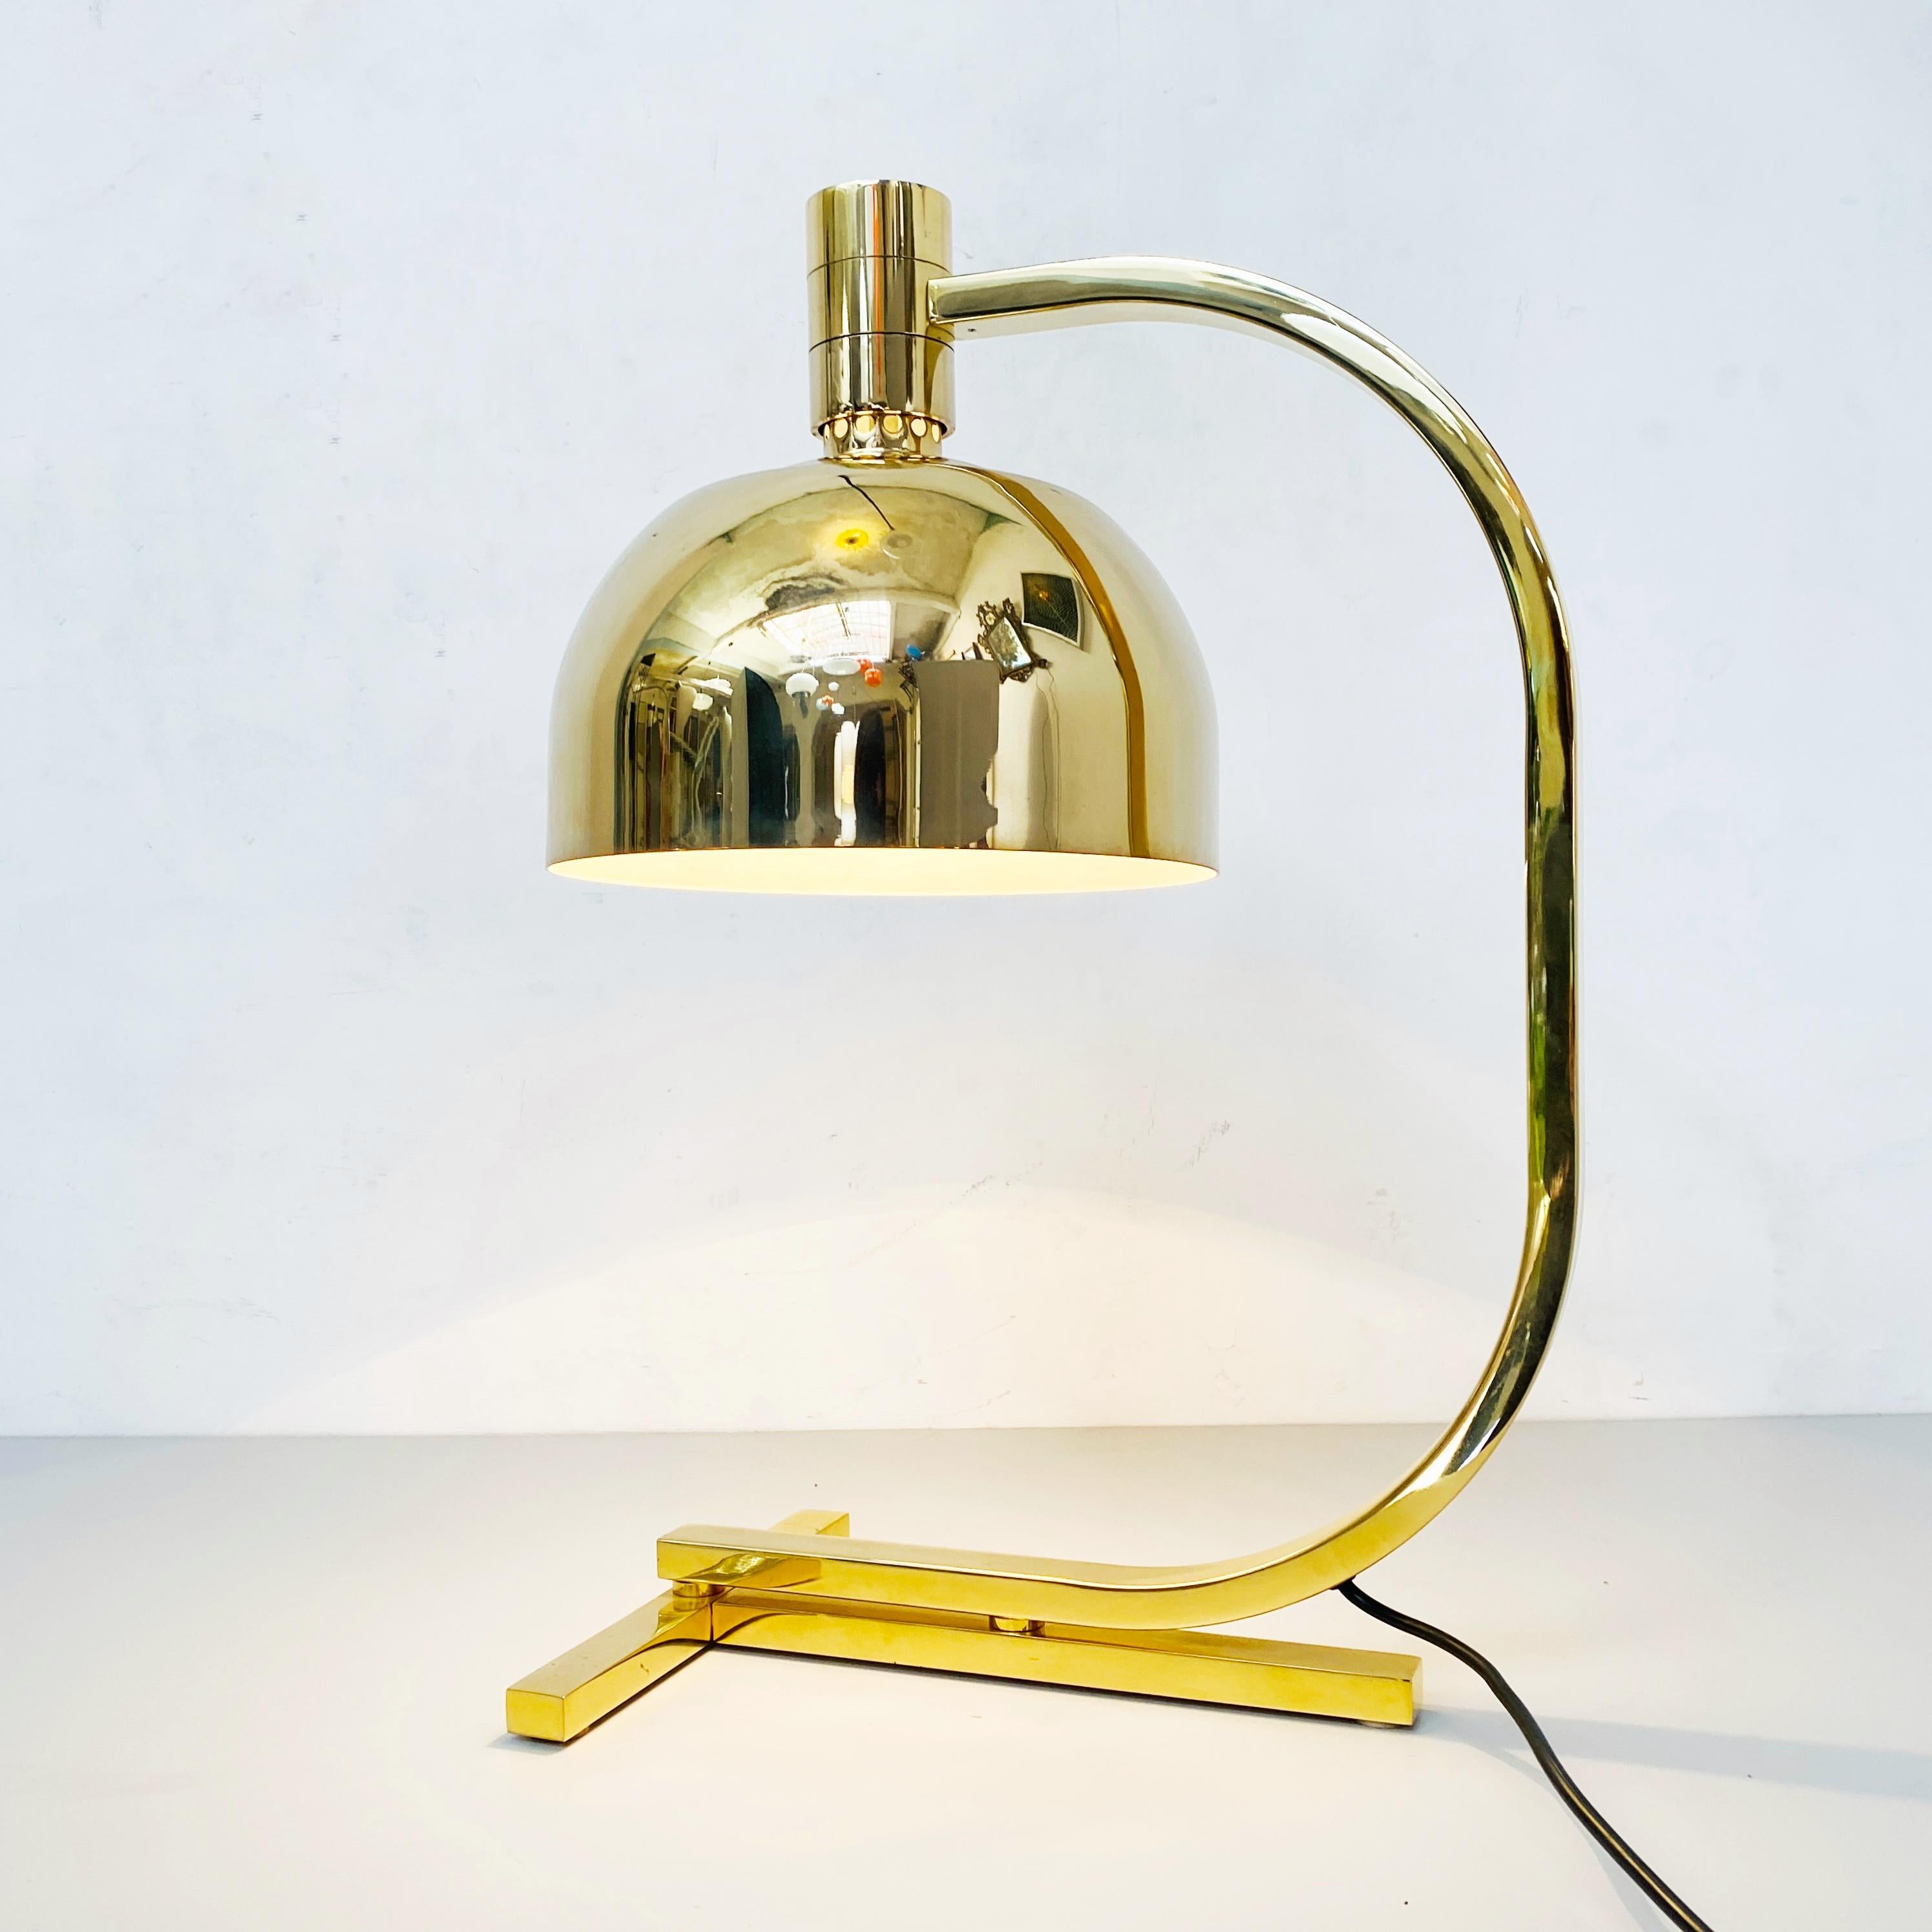 Italian Mid-Century Modern AM \ AS Series gold chrome table lamp by Franco Albini and Franca Helg for Sirrah, 1969
Lamp belonging to the AM / AS series produced by Sirrah in 1969 and designed by Franco Albini and Franca Helg. Table lamp with